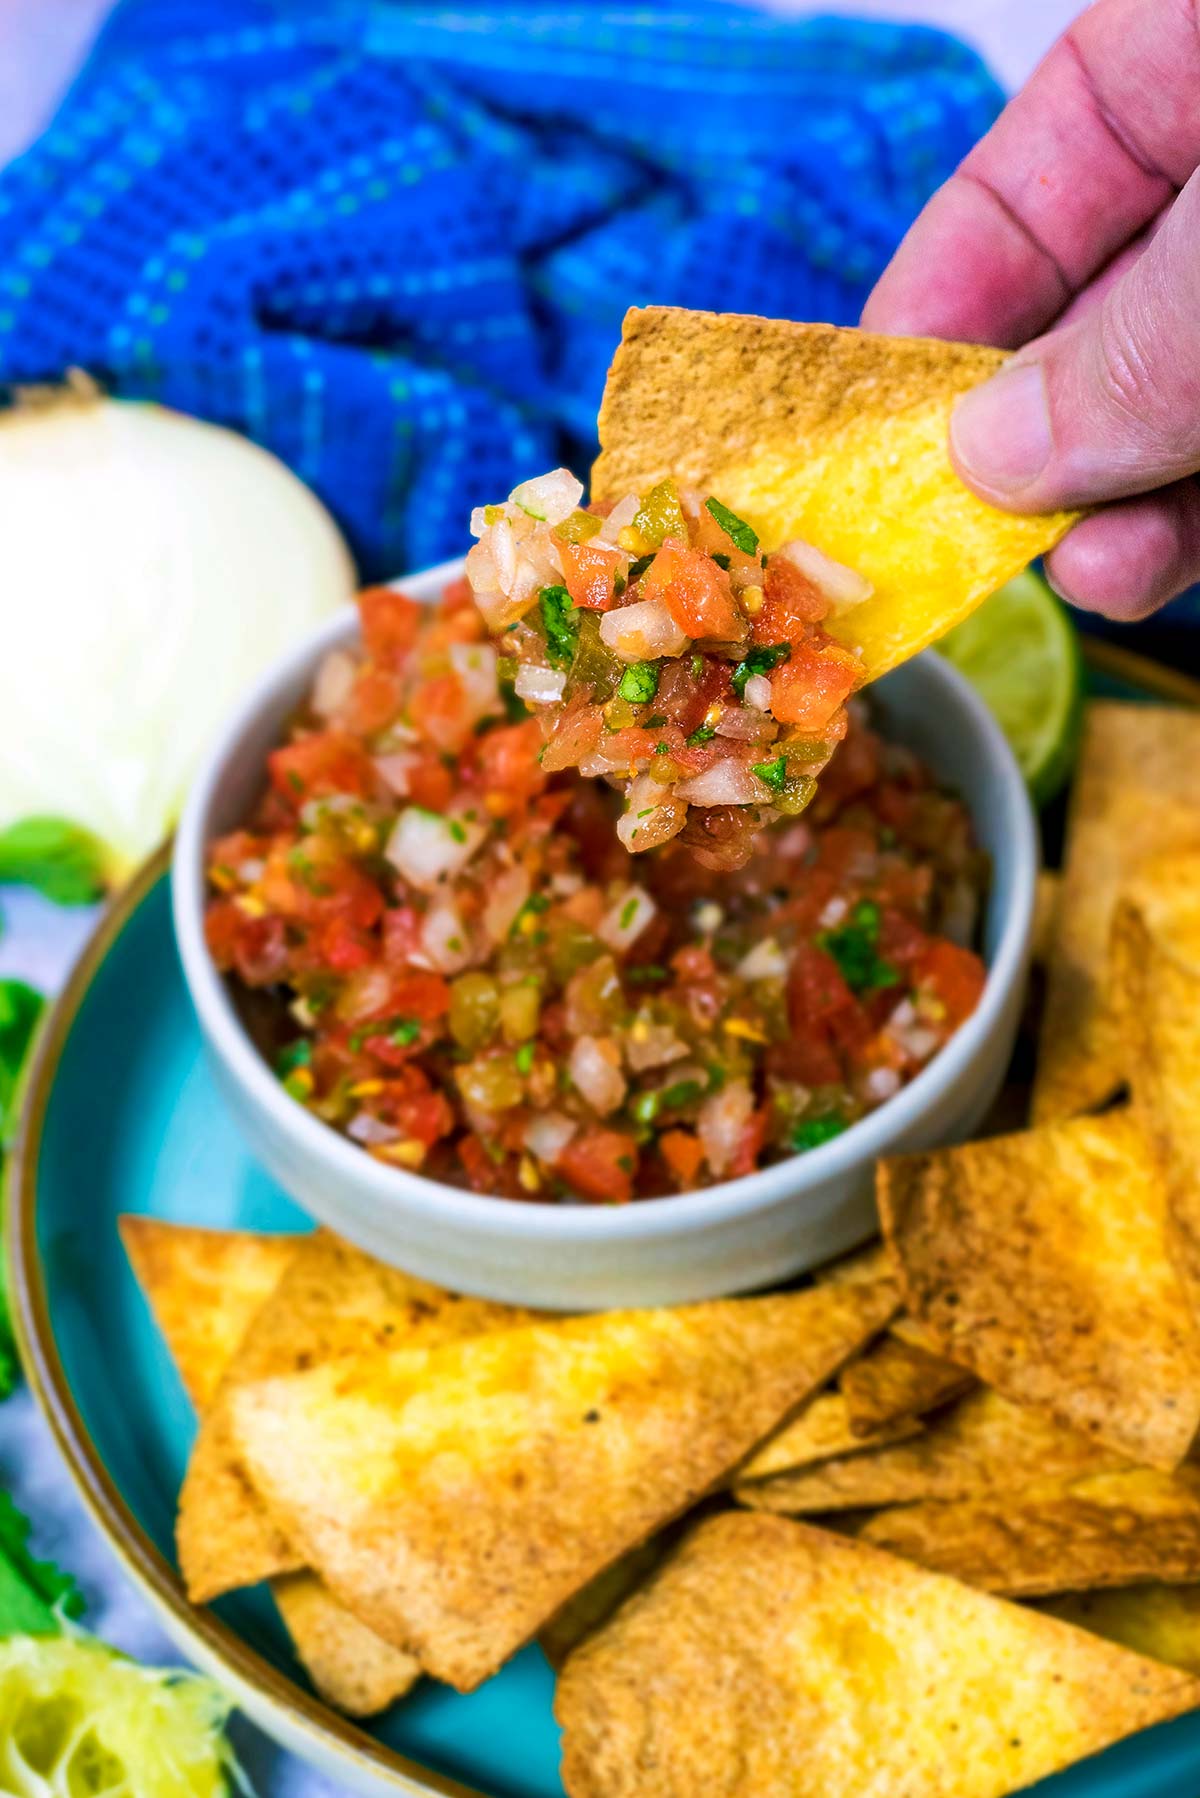 A hand scooping salsa with a tortilla chip.